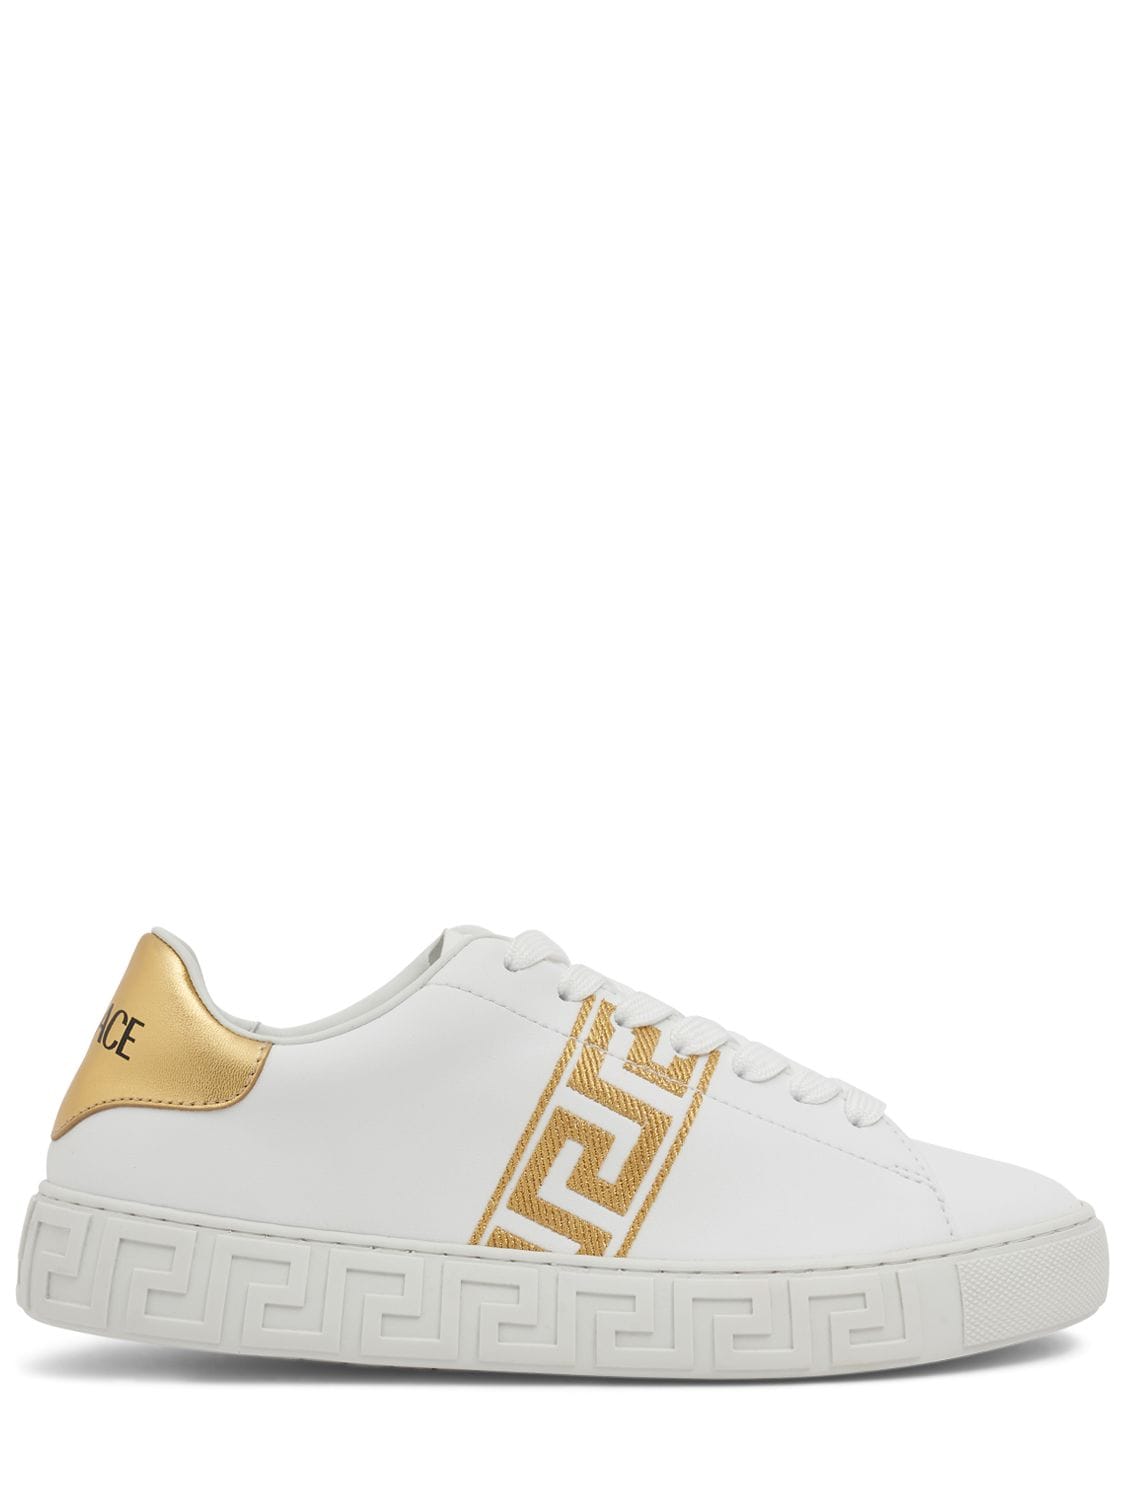 Image of Faux Leather Sneakers W/ Embroidery